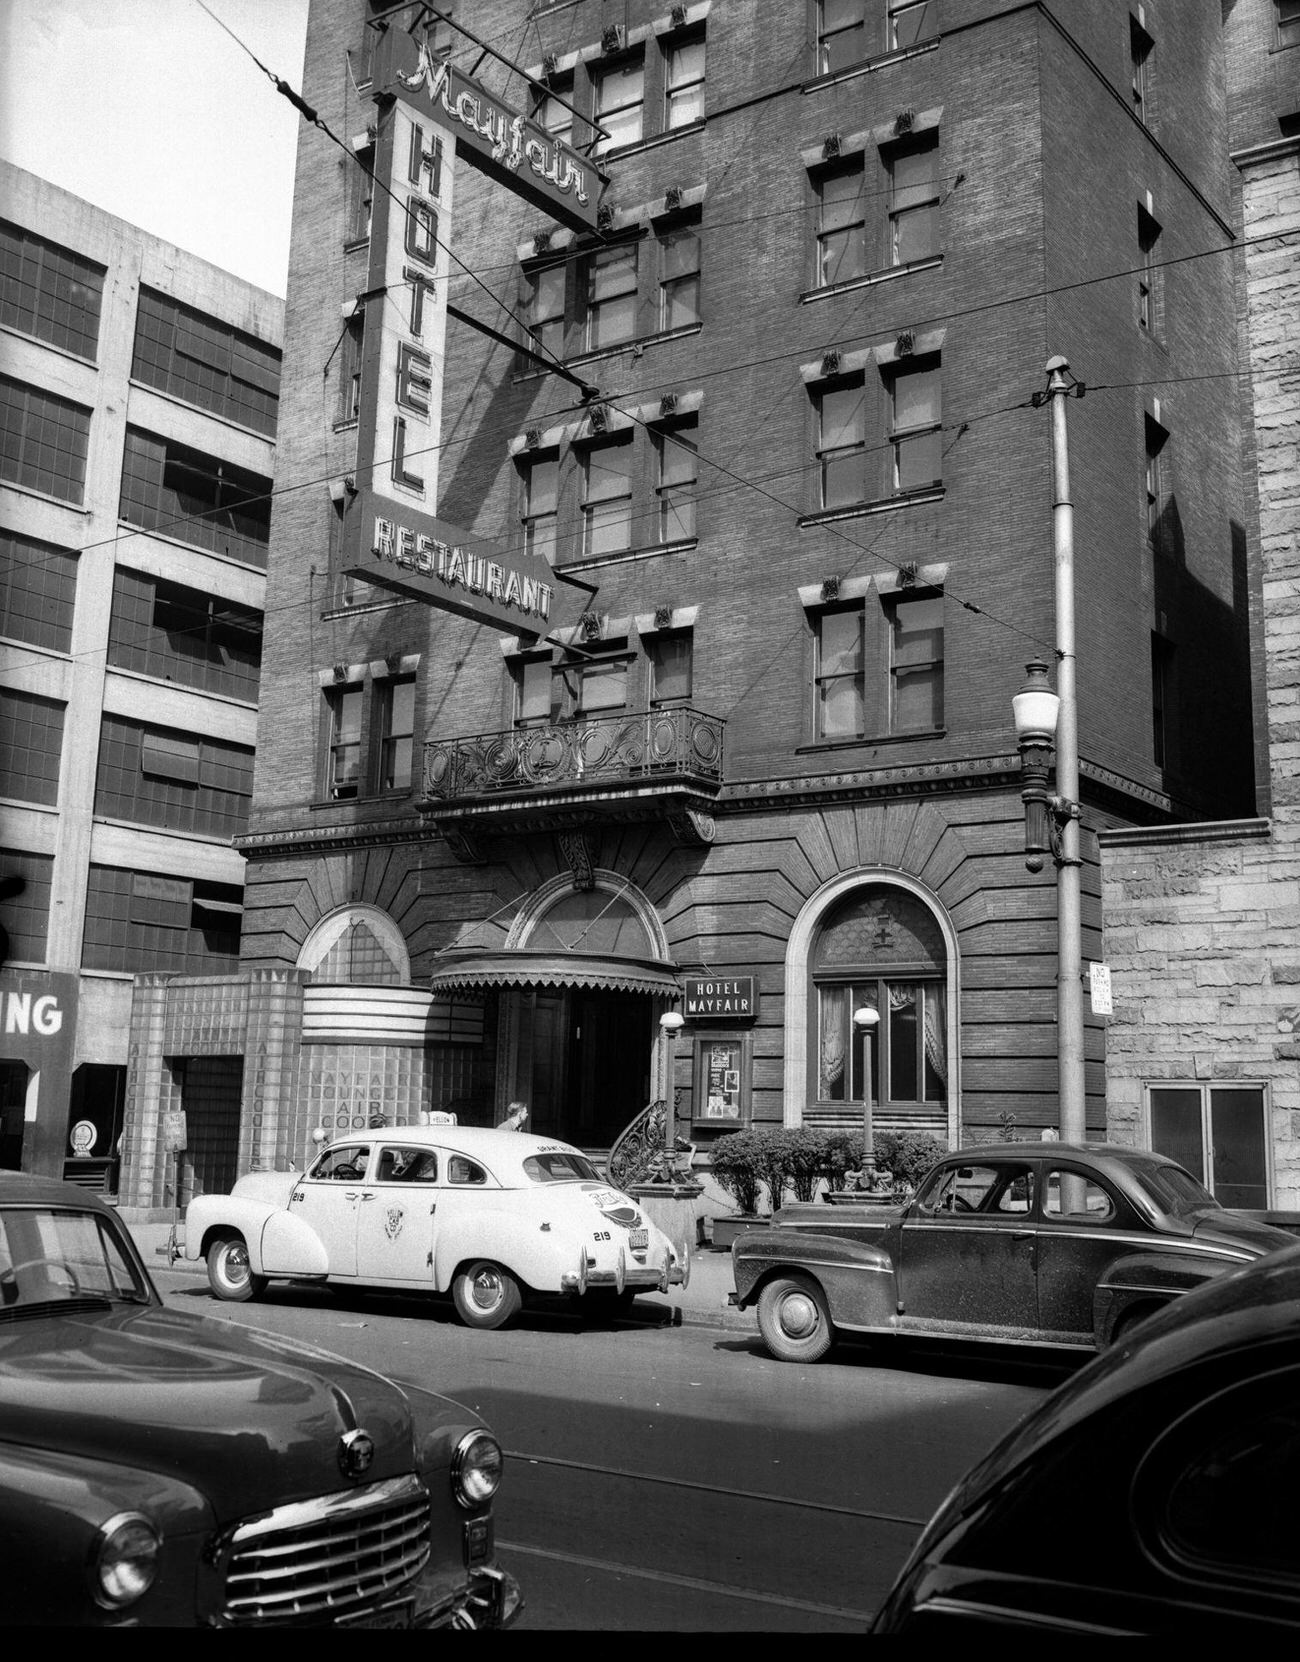 Mayfair Hotel and Restaurant, Site of Racial Discrimination Lawsuit by Nat King Cole, 1949